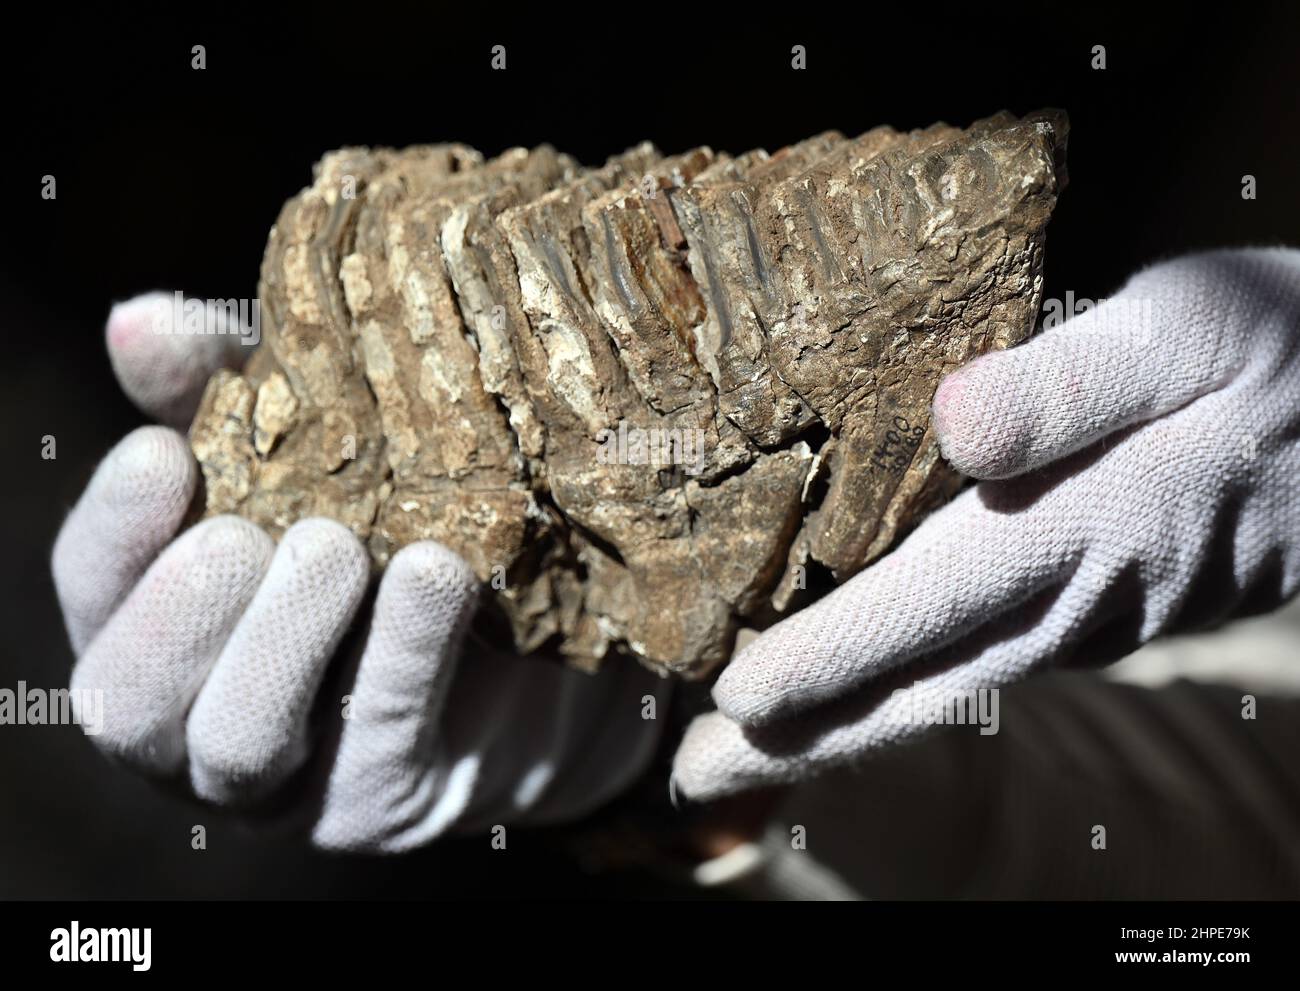 Gera, Germany. 17th Feb, 2022. The molar tooth of a mammoth is presented in the Gera Natural History Museum. A total of twelve ancient mammoth teeth from the Natural History Museum in Gera are to be restored this year. With the help of lottery funds from the Free State and some company donations, the required 6500 euros have been collected, according to the Geraer Mineralien- und Fossilienfreunde association. (to dpa 'Ancient mammoth teeth saved by fundraising campaign') Credit: Martin Schutt/dpa-Zentralbild/dpa/Alamy Live News Stock Photo